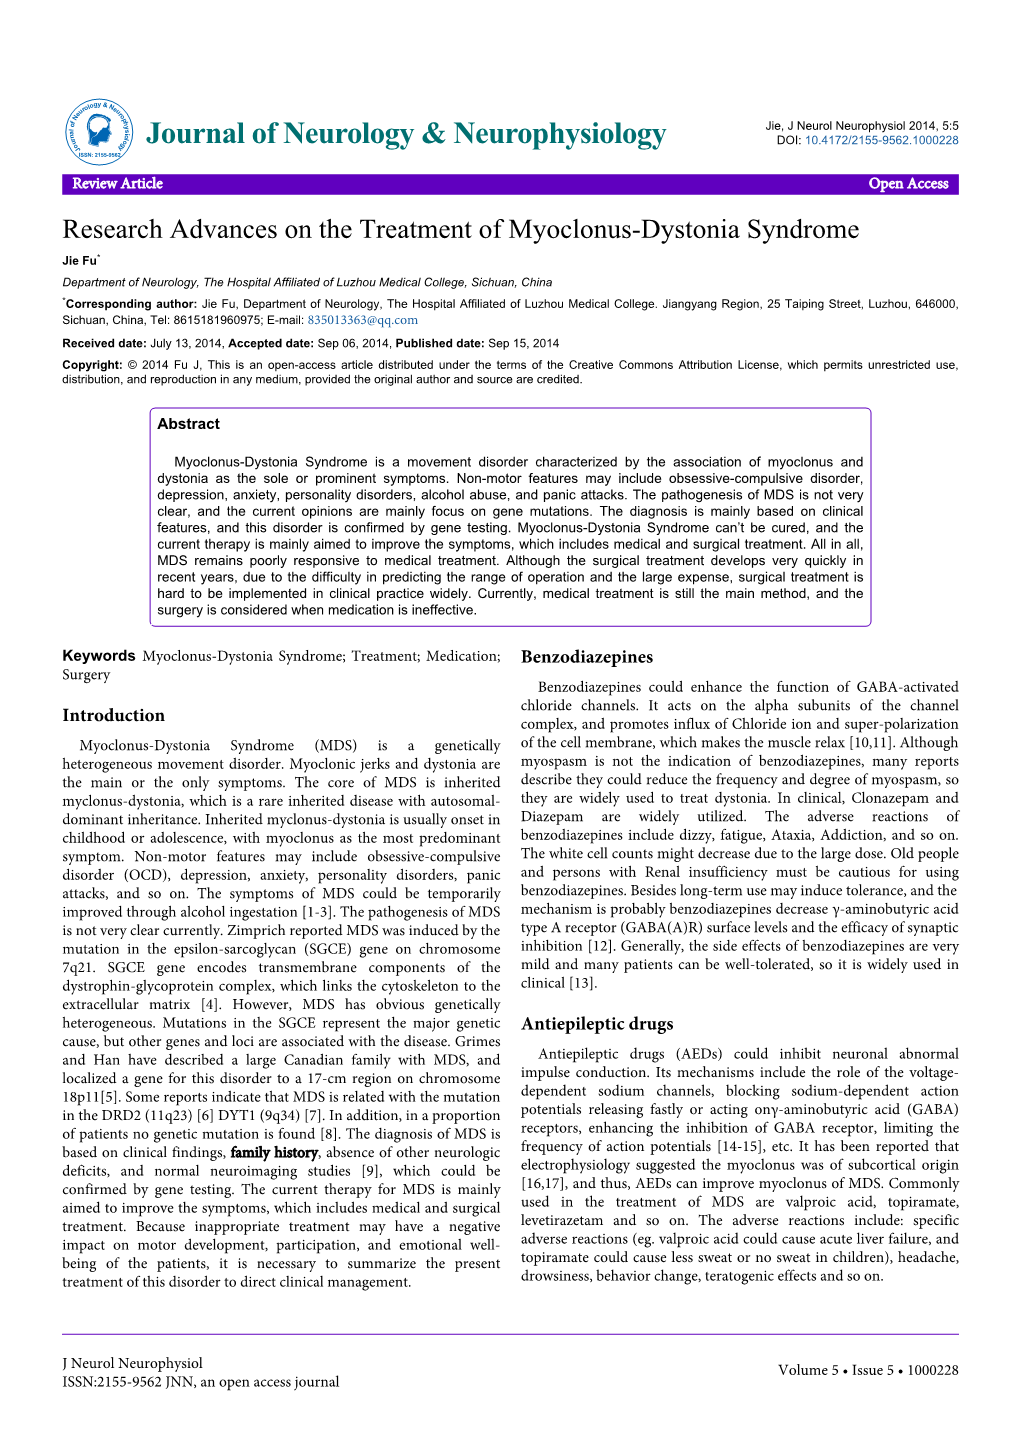 Research Advances on the Treatment of Myoclonus-Dystonia Syndrome